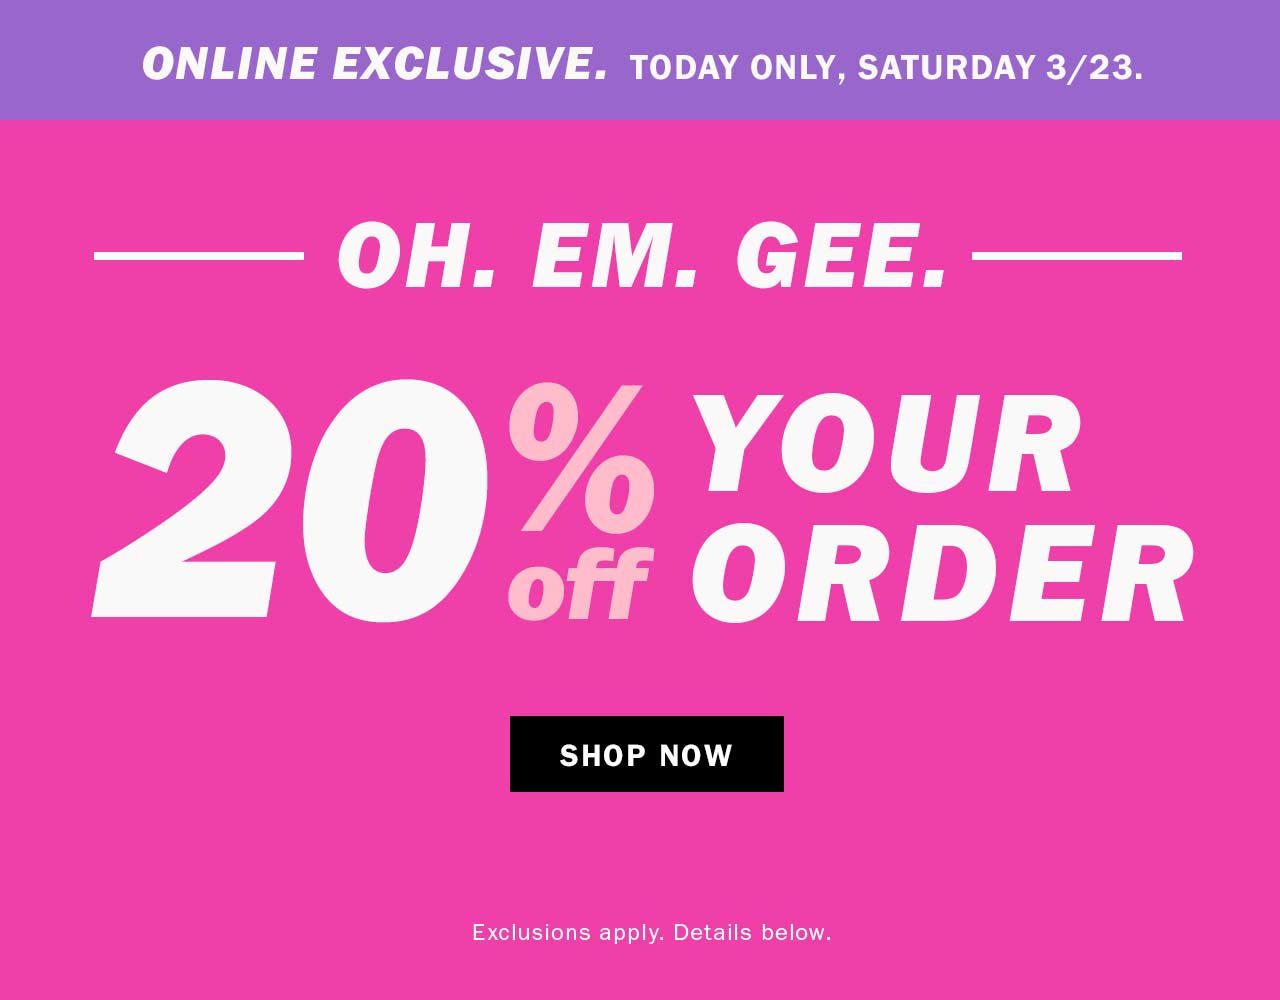 20% OFF YOUR ORDER